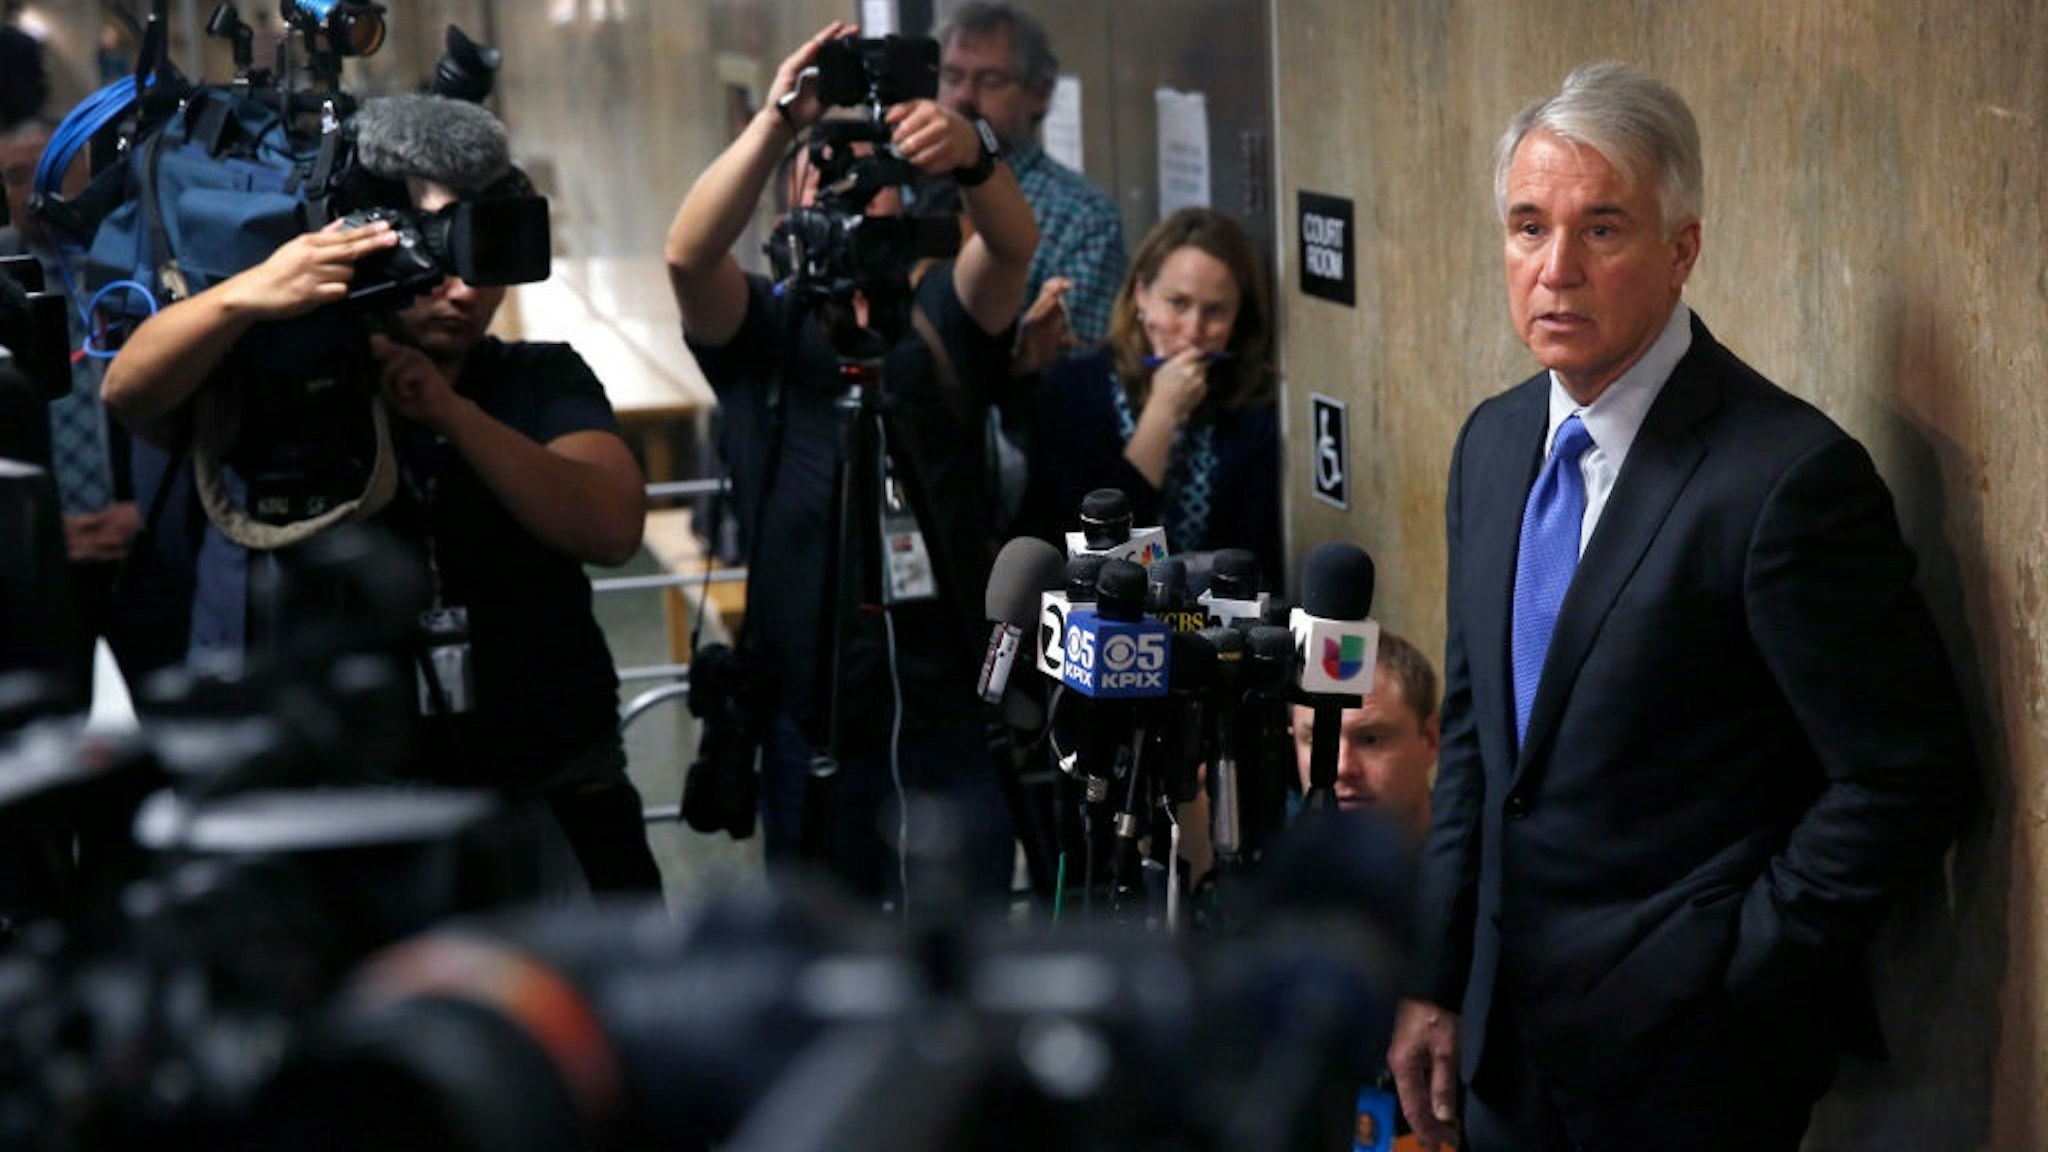 District Attorney George Gascon answers questions from the news media after the sentencing hearing for Jose Inez Garcia Zarate at the Hall of Justice in San Francisco, Calif. on Friday, Jan. 5, 2018.